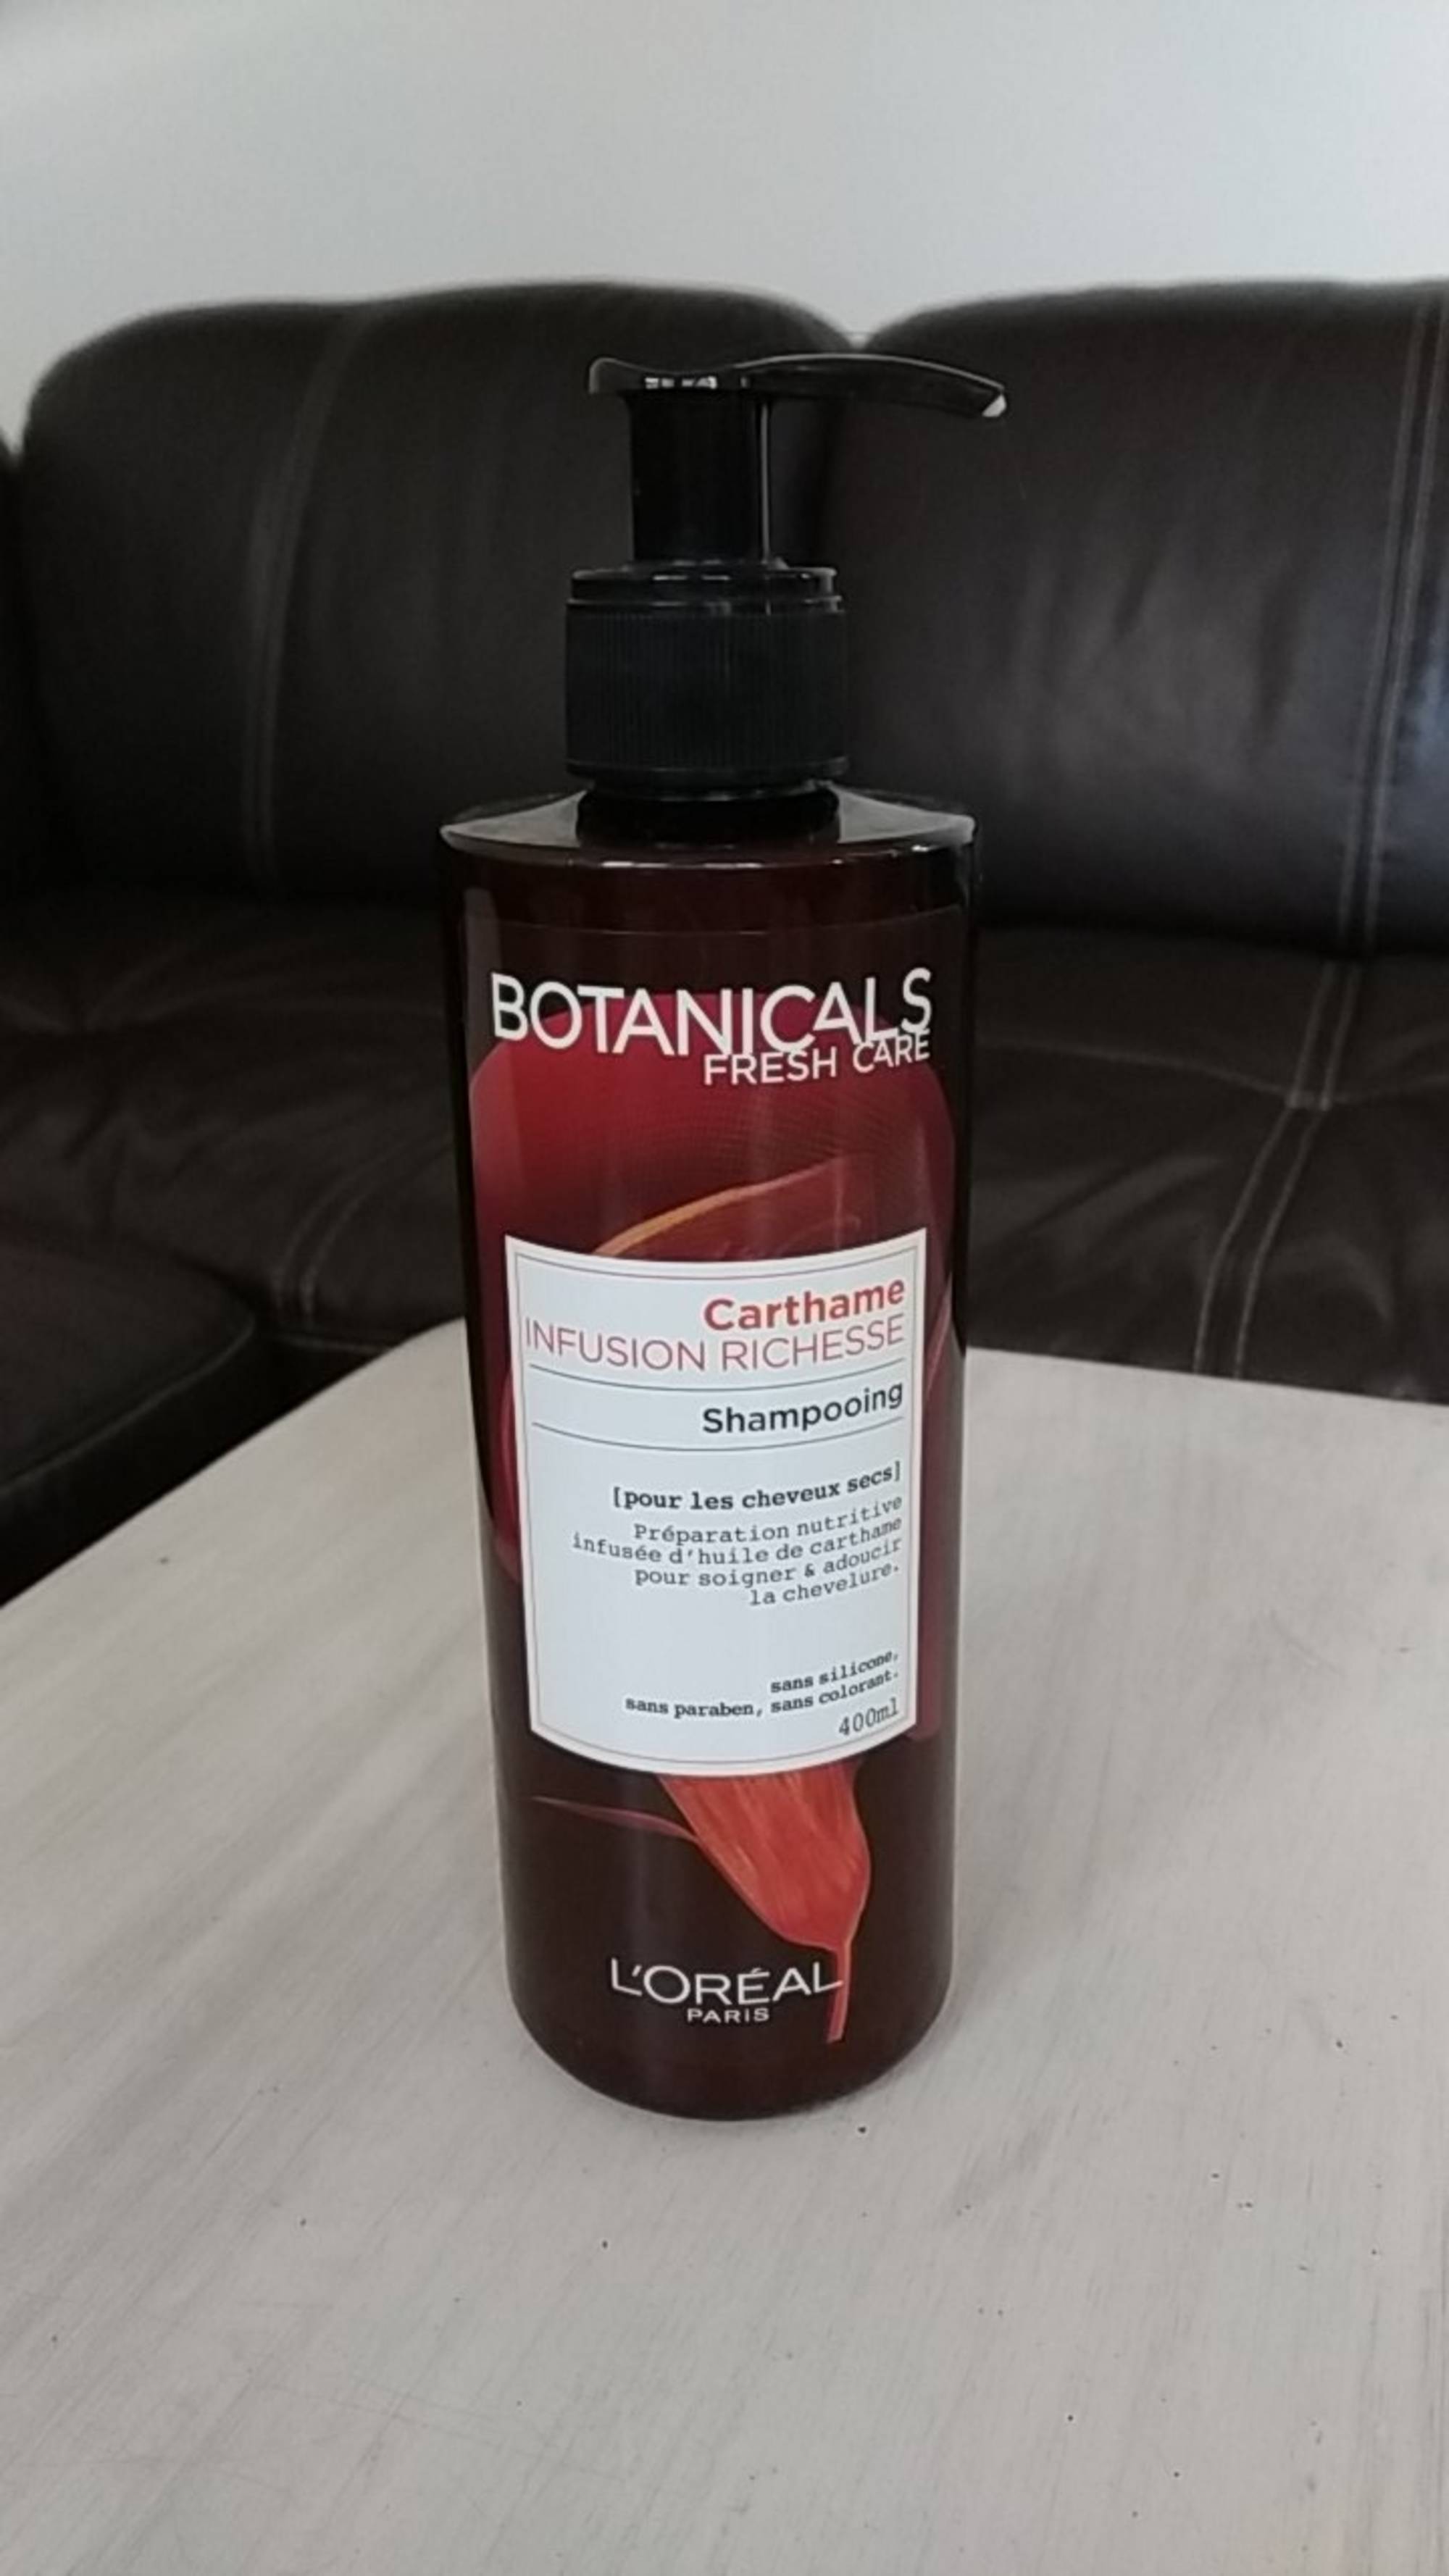 L'ORÉAL - Botanicals fresh care - Carthame infusion richesse - Shampooing